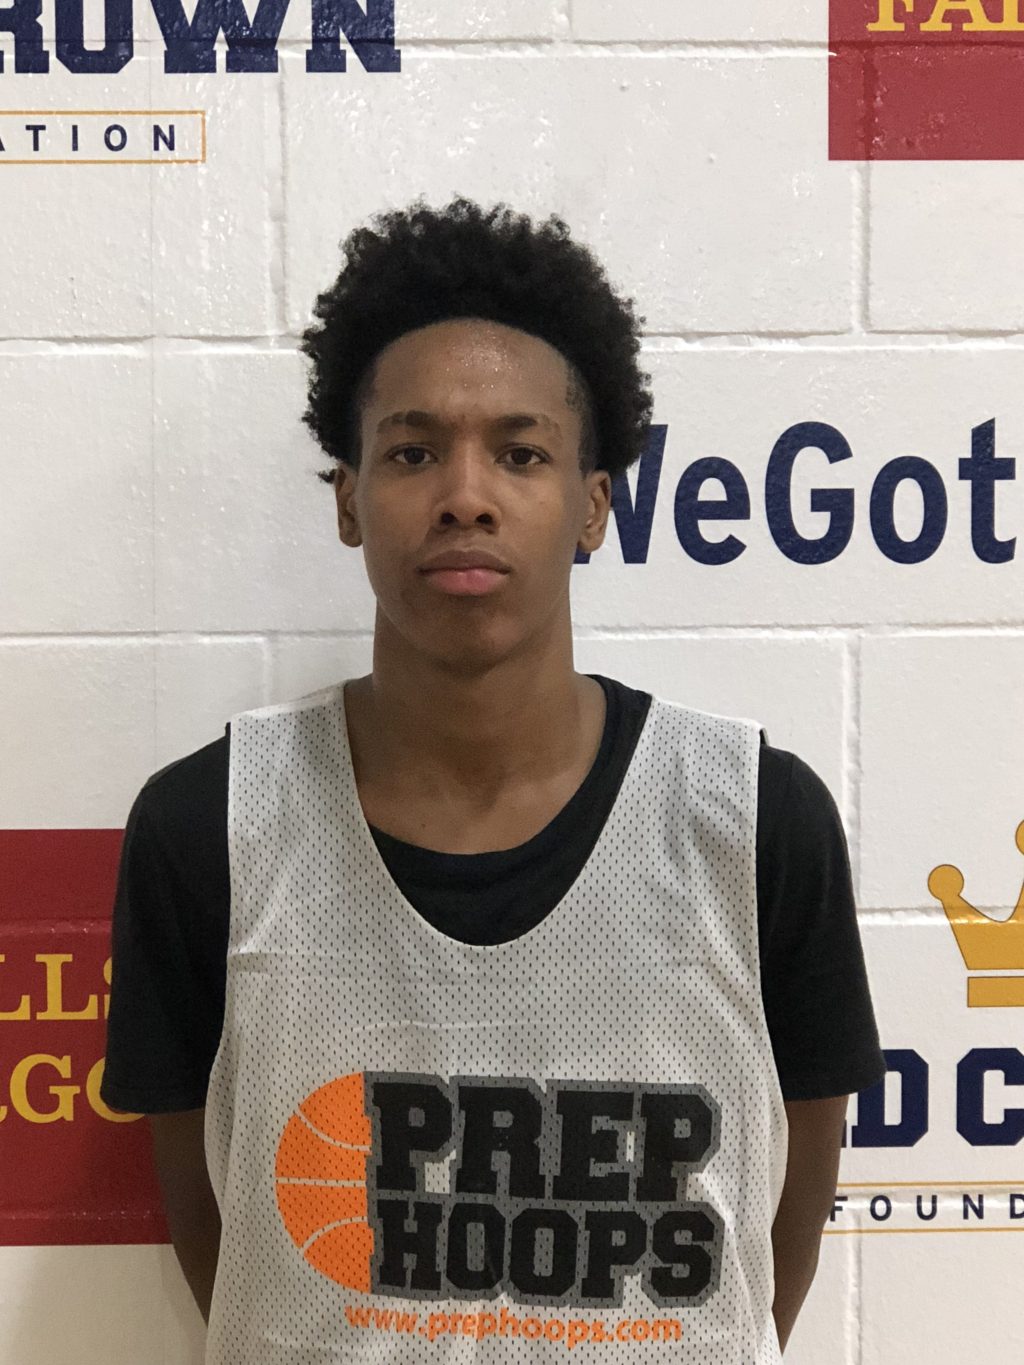 Top 250 Prep Hoops Expo: MVP&#8217;s on the Day